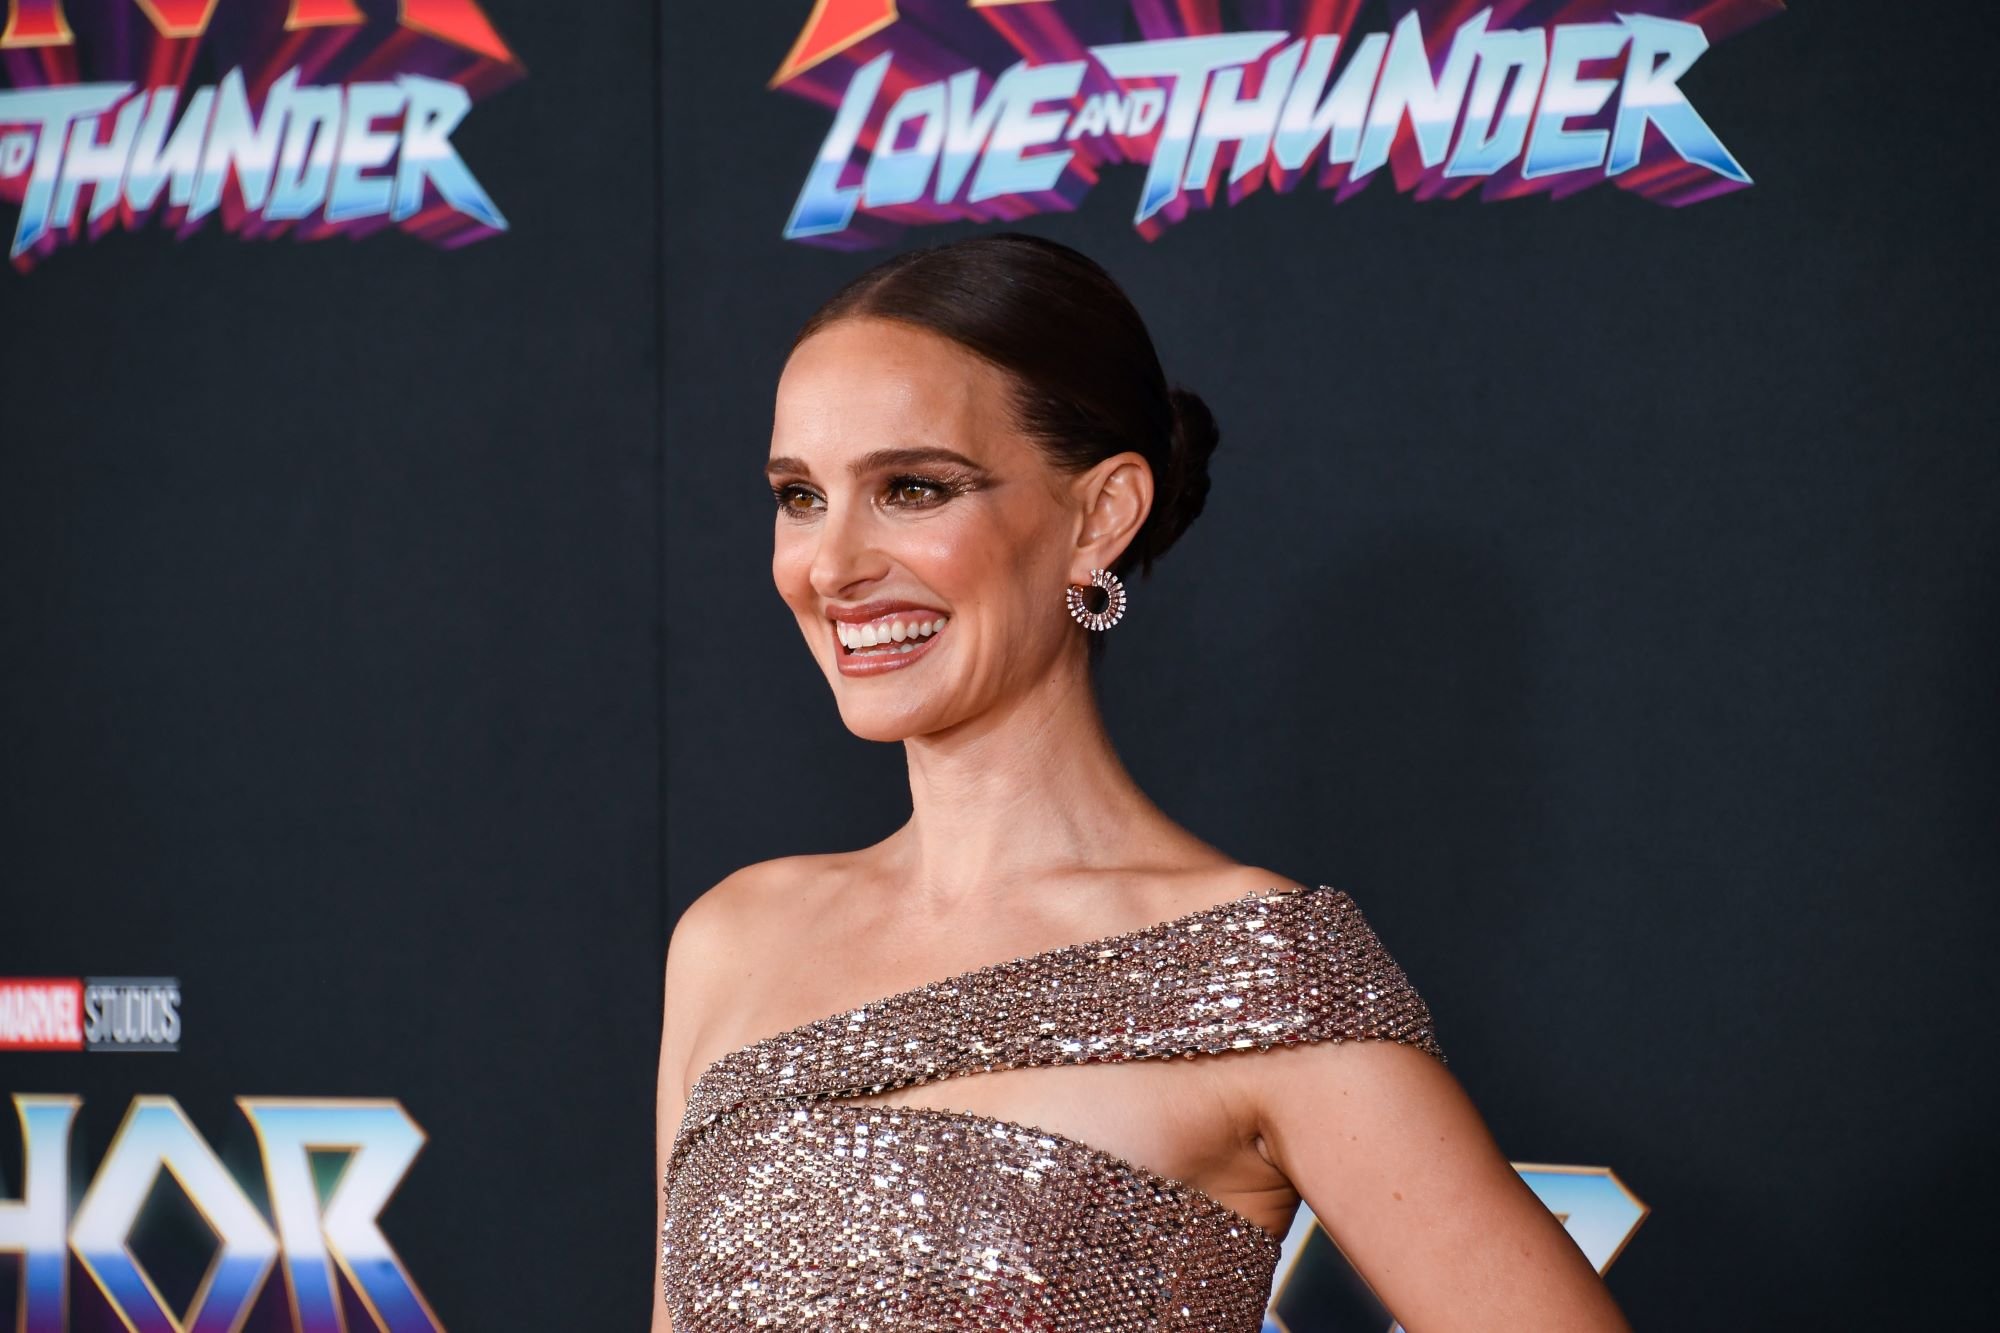 Natalie Portman, who stars as Jane Foster in 'Thor: Love and Thunder,' wears a pink sparkly off-the-shoulder dress.